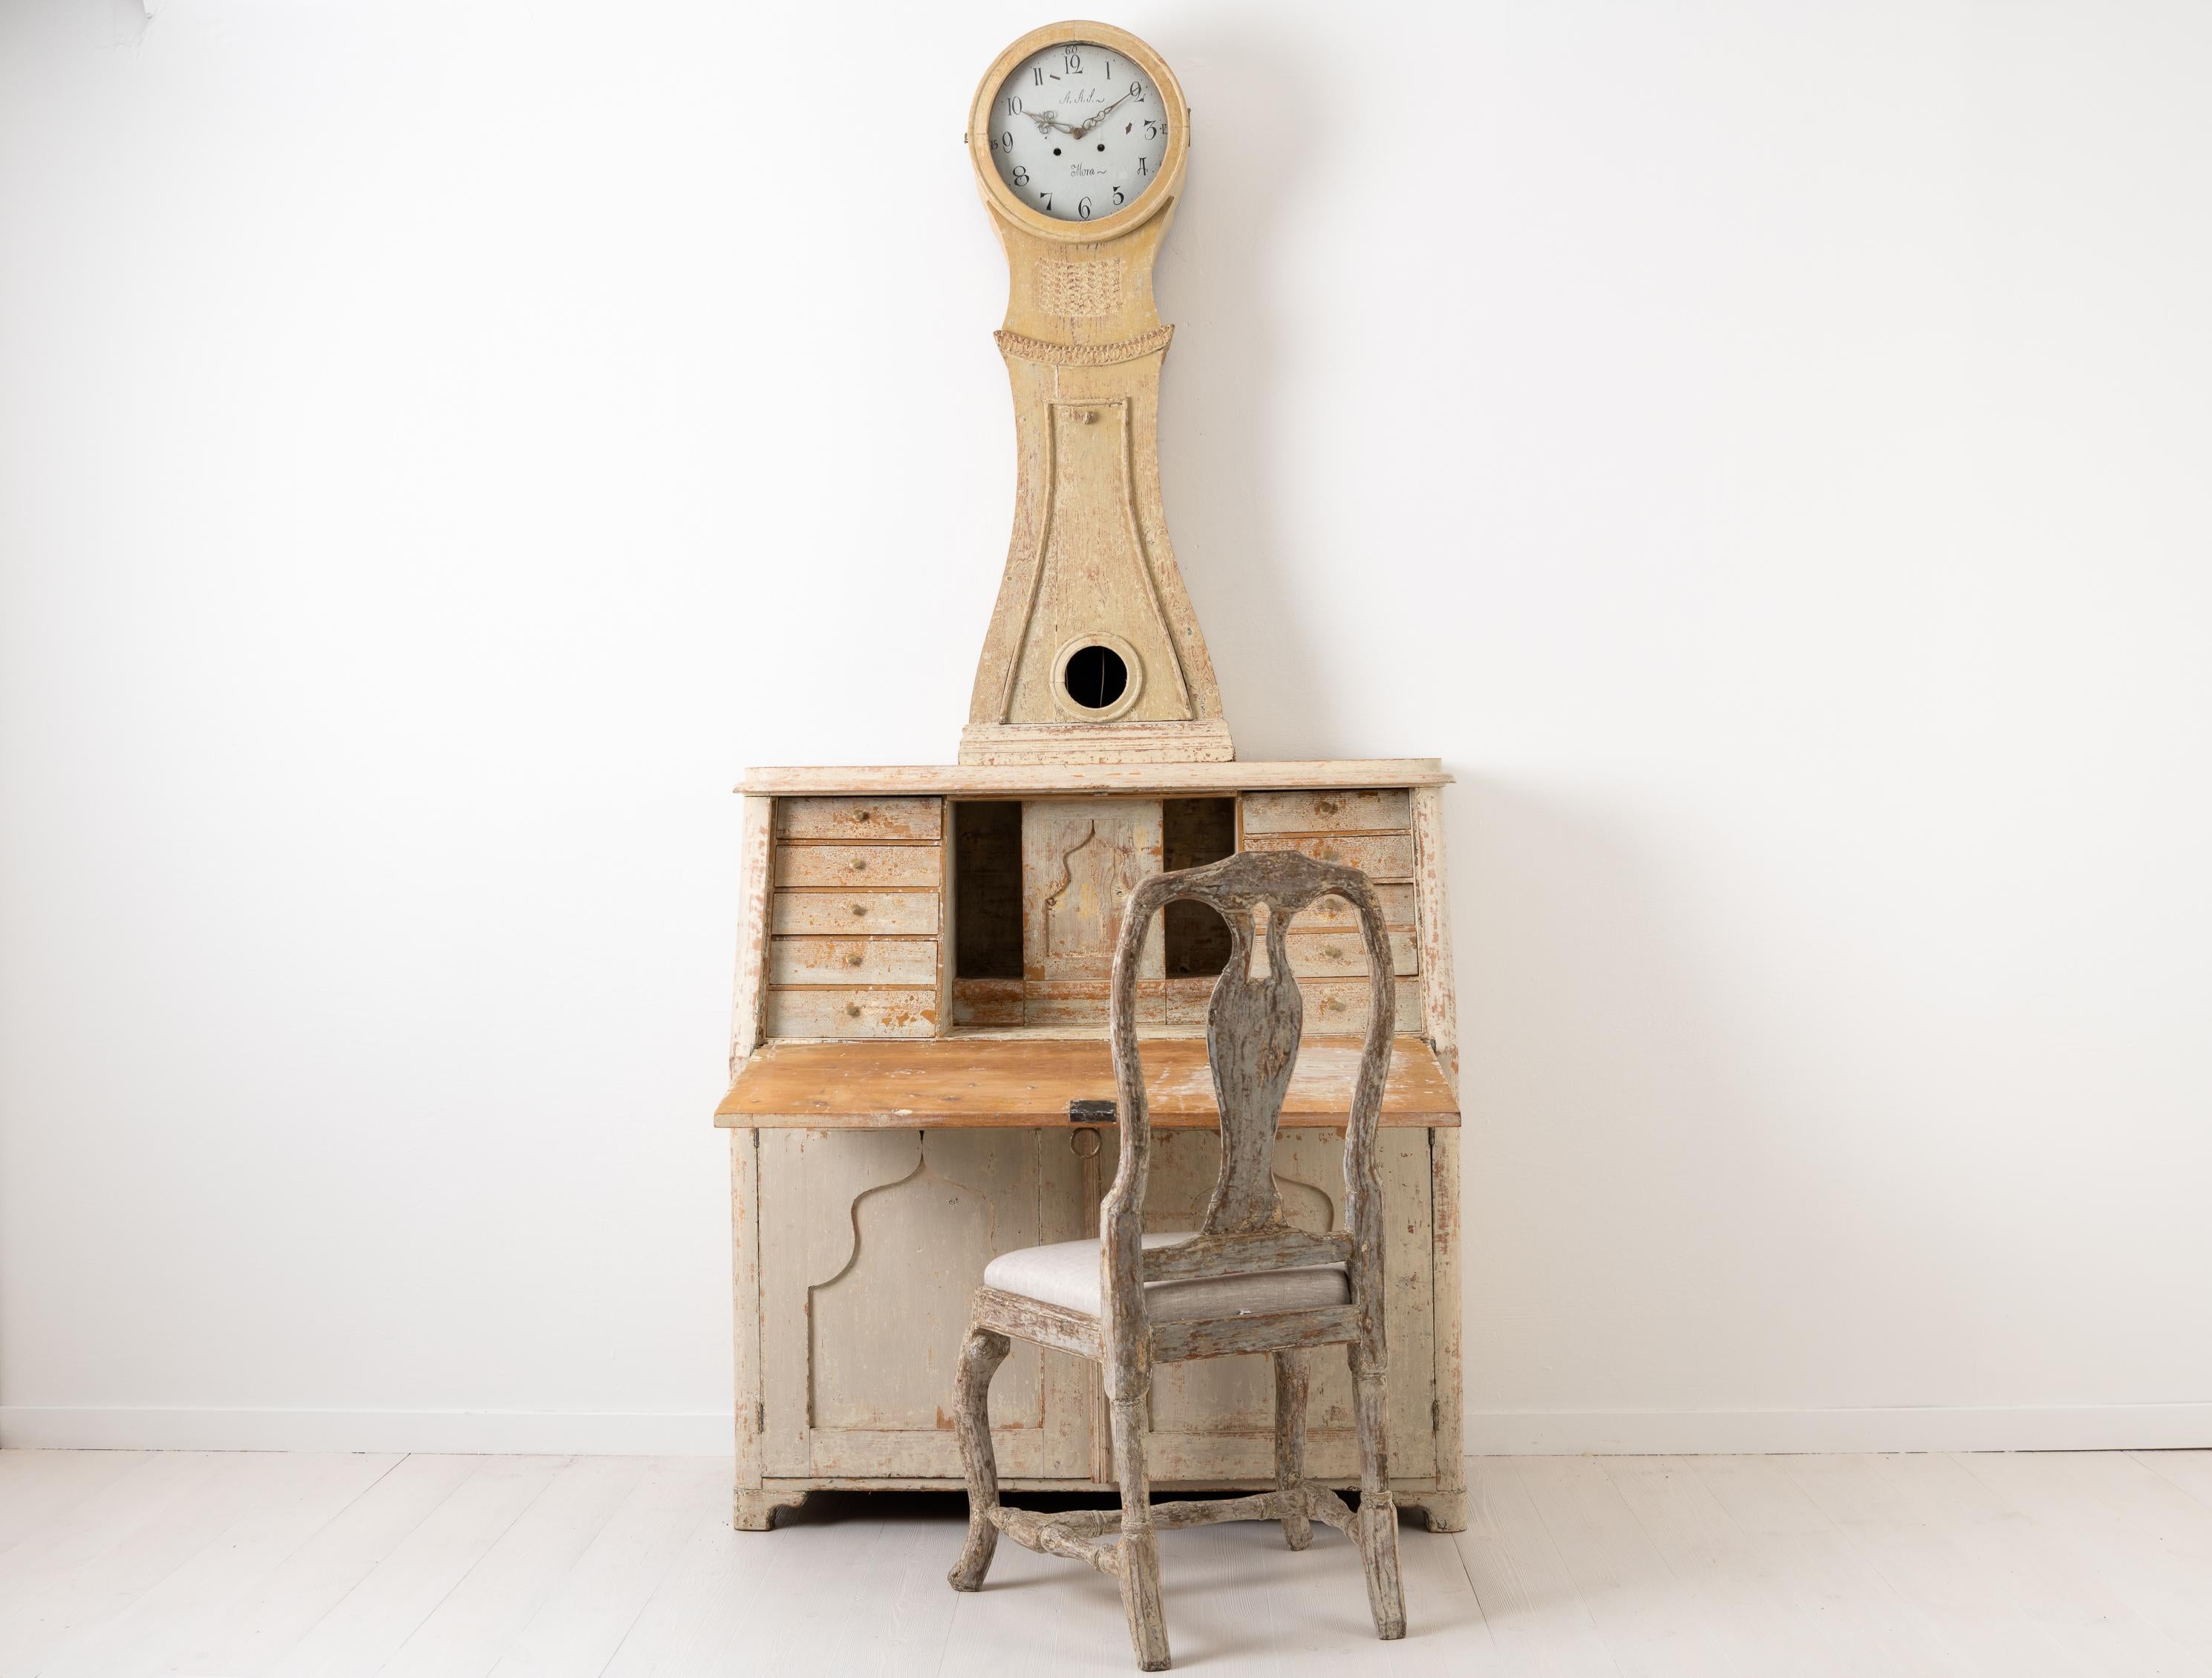 Northern Swedish clock secretary from circa 1820. The clock is in two parts and dry scraped to the original light paint. Antique hardware and lock and key in working condition. The interior to the desk has drawers on each side and an open